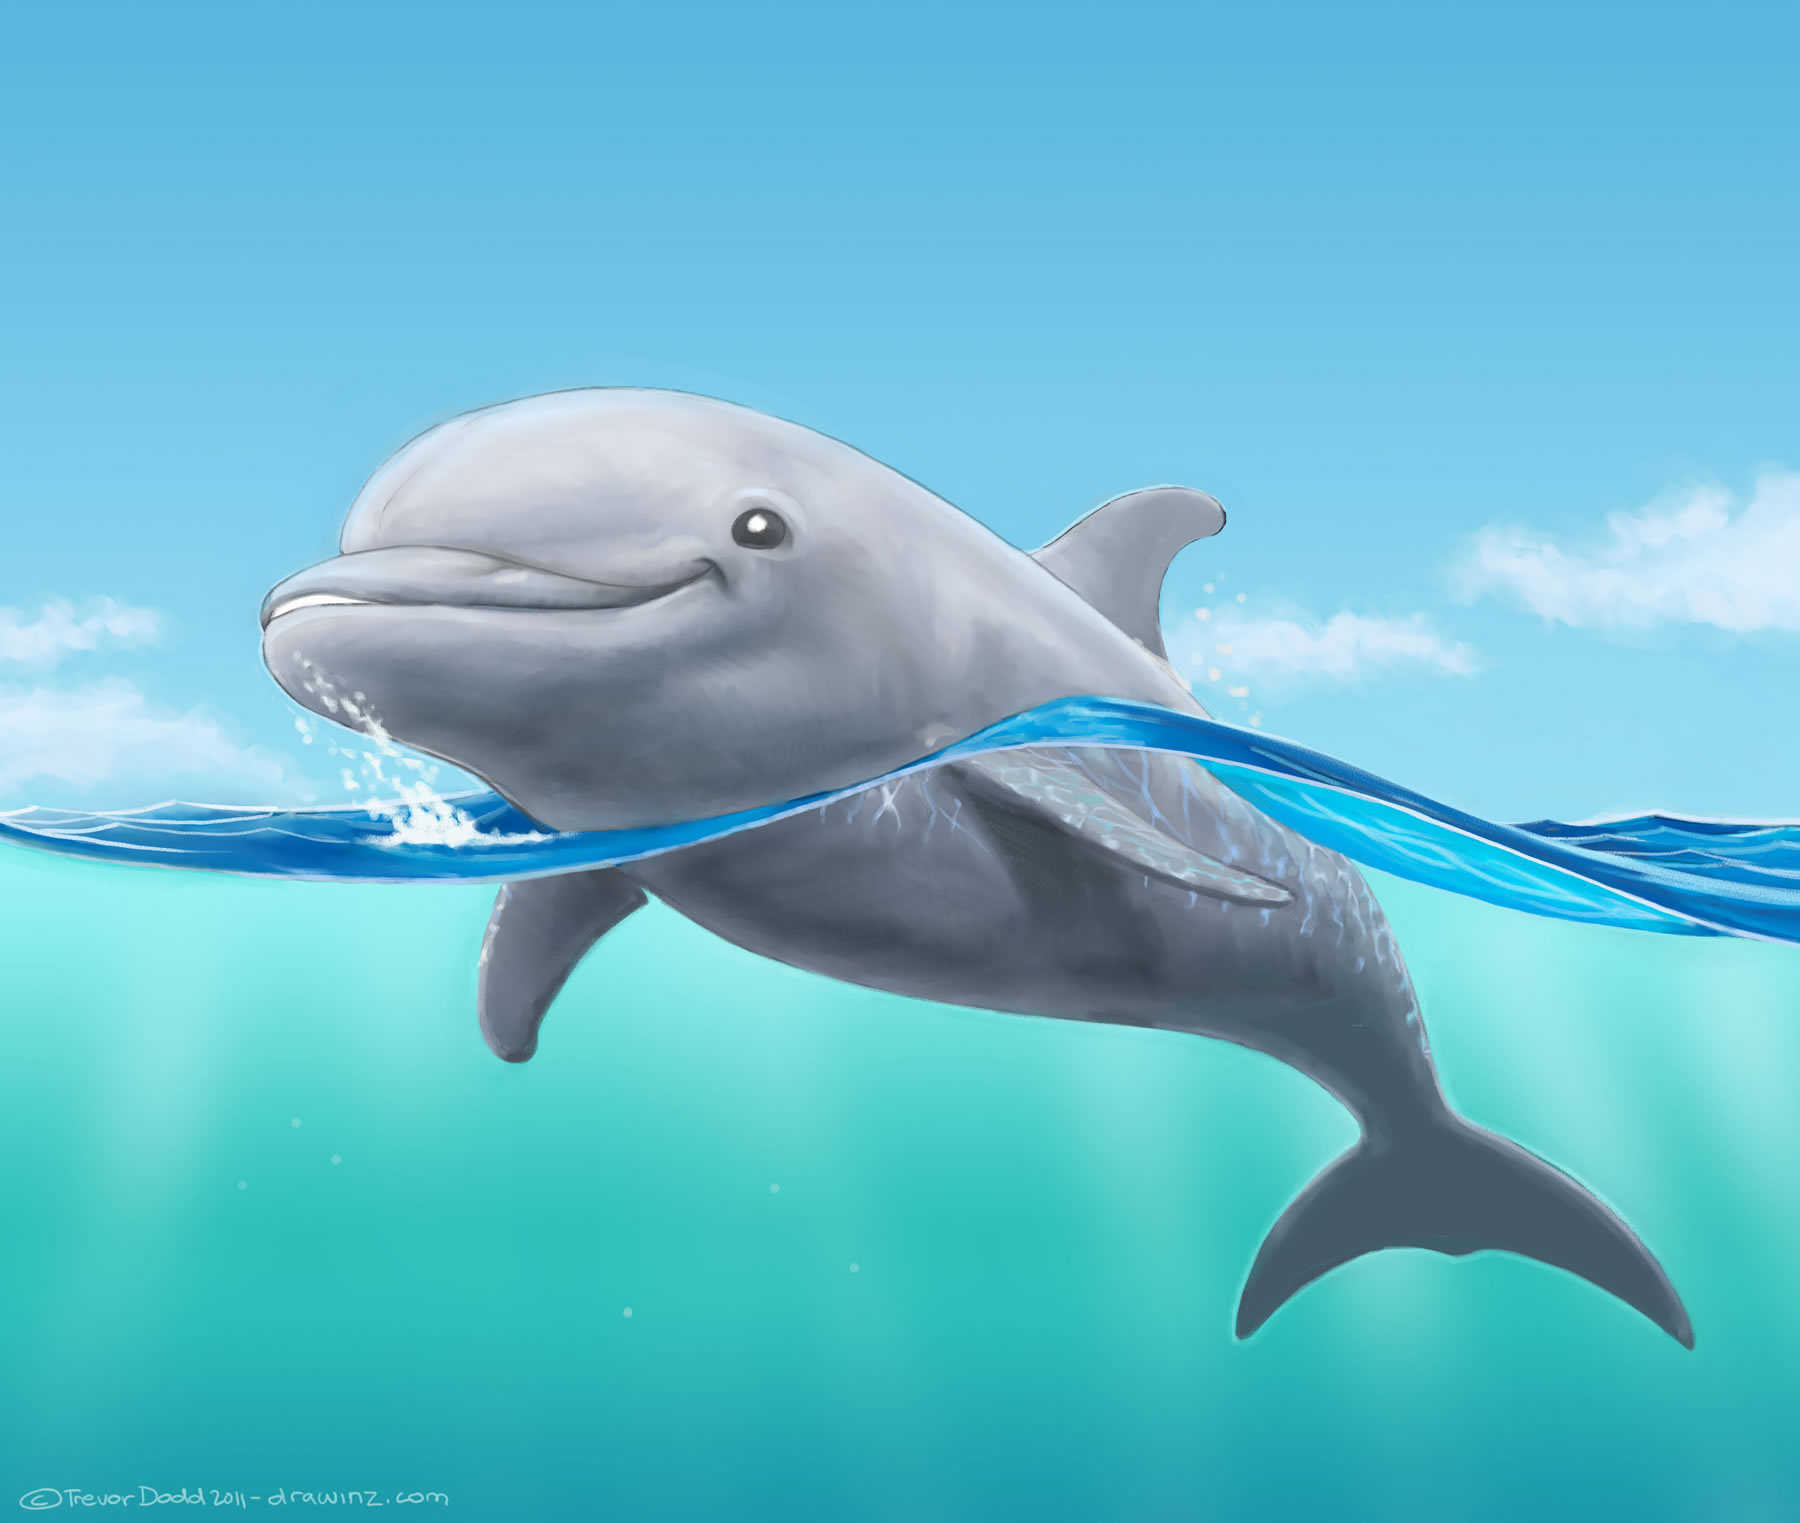 New drawing of a dolphin - Drawinz